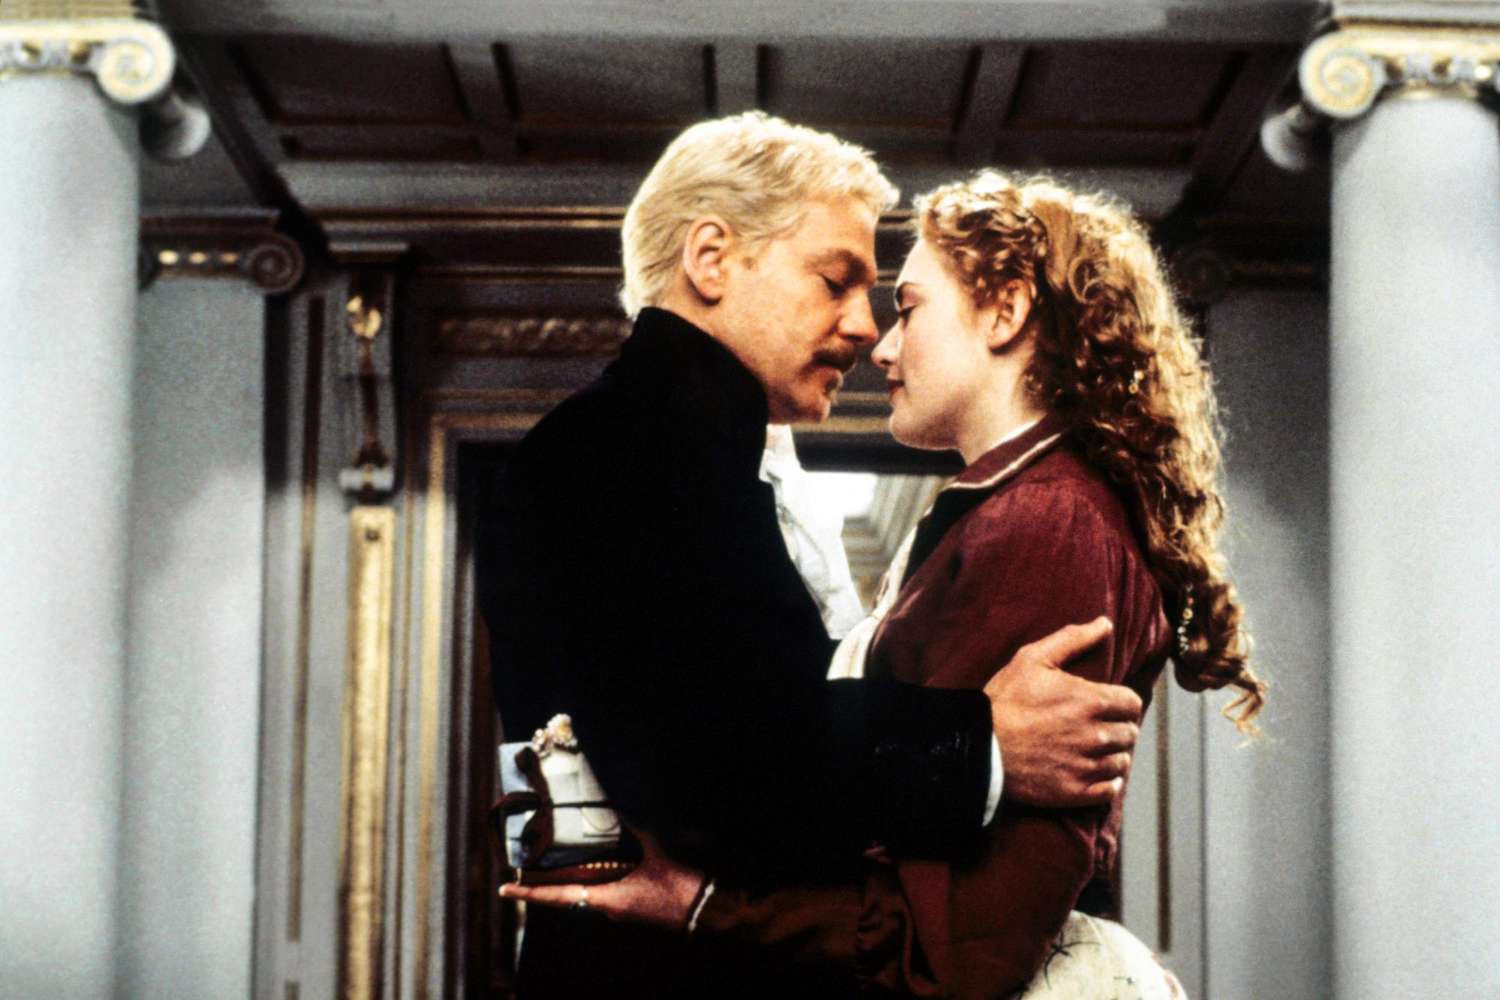 HAMLET, from left: Kenneth Branagh, Kate Winslet, 1996, &copy;Sony Pictures/courtesy Everett Collection